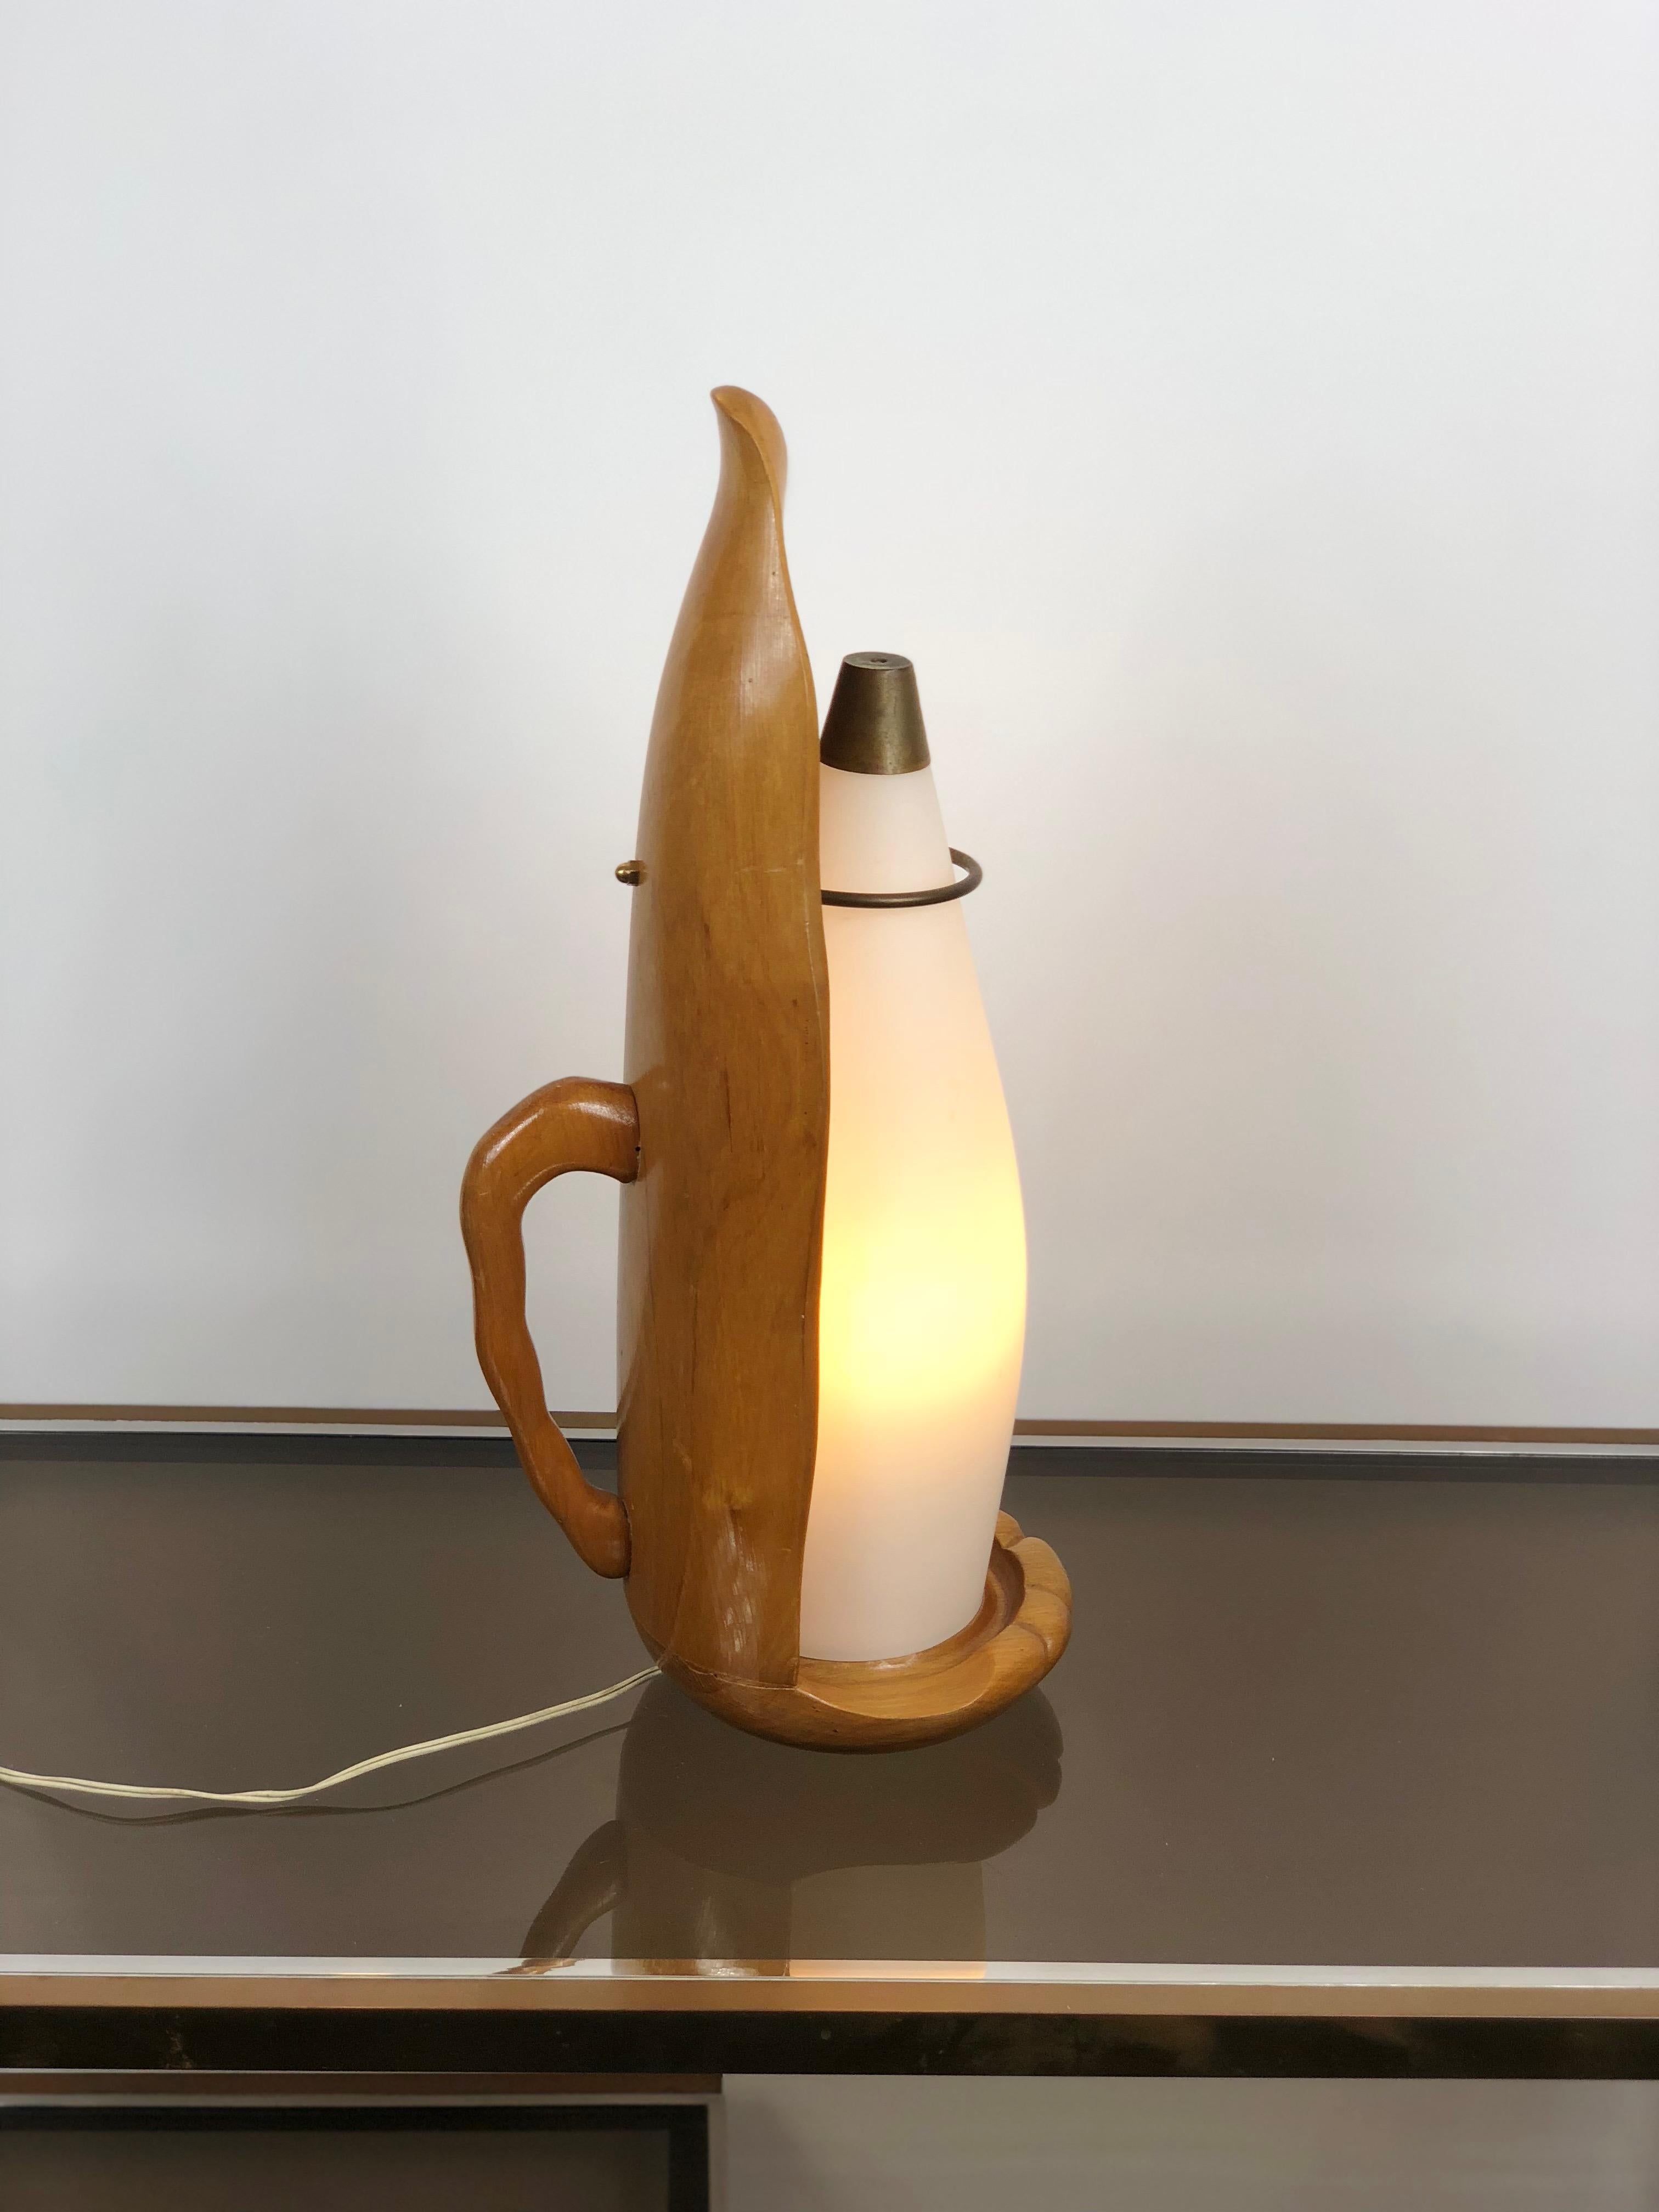 This particular and sophisticated dolphin lamp made by Aldo Tura is most likely a unique protoype lamp. Aldo Tura lamps were done in small editions, thus the details and level of sophistication in carving on this particular lamp would be impossible